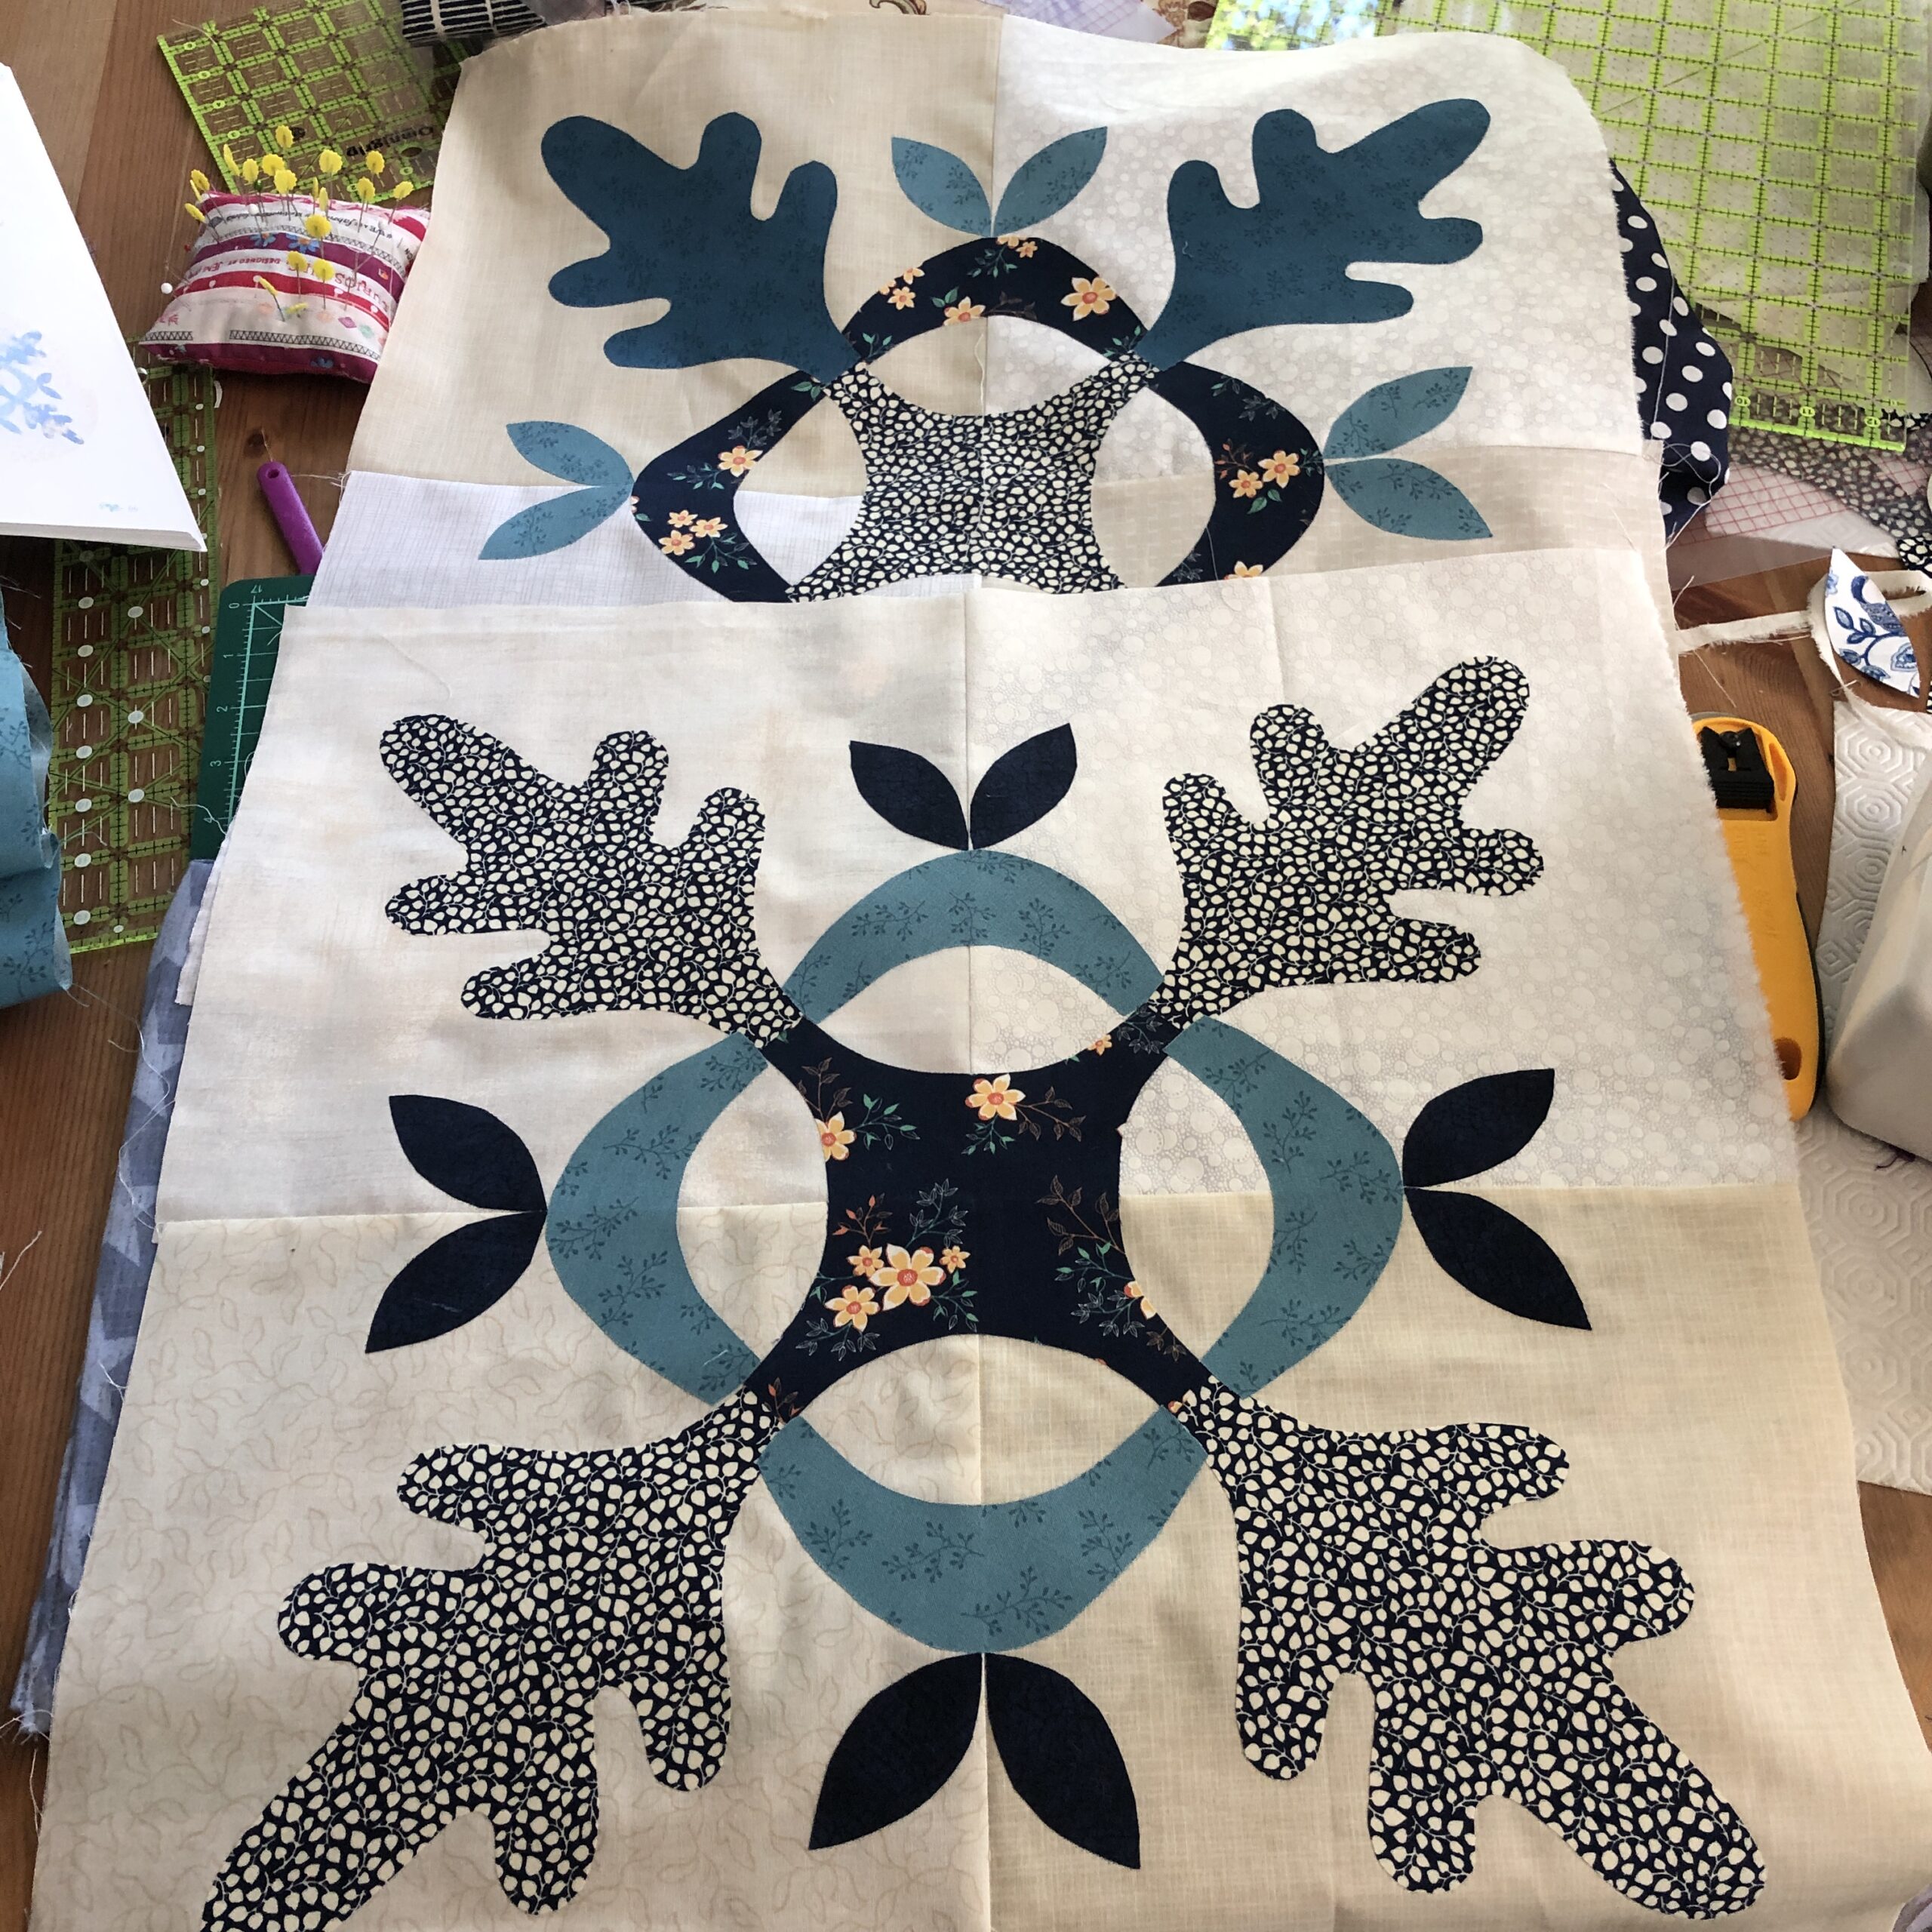 Working on Thousand Oaks quilt by Edyta Sitar